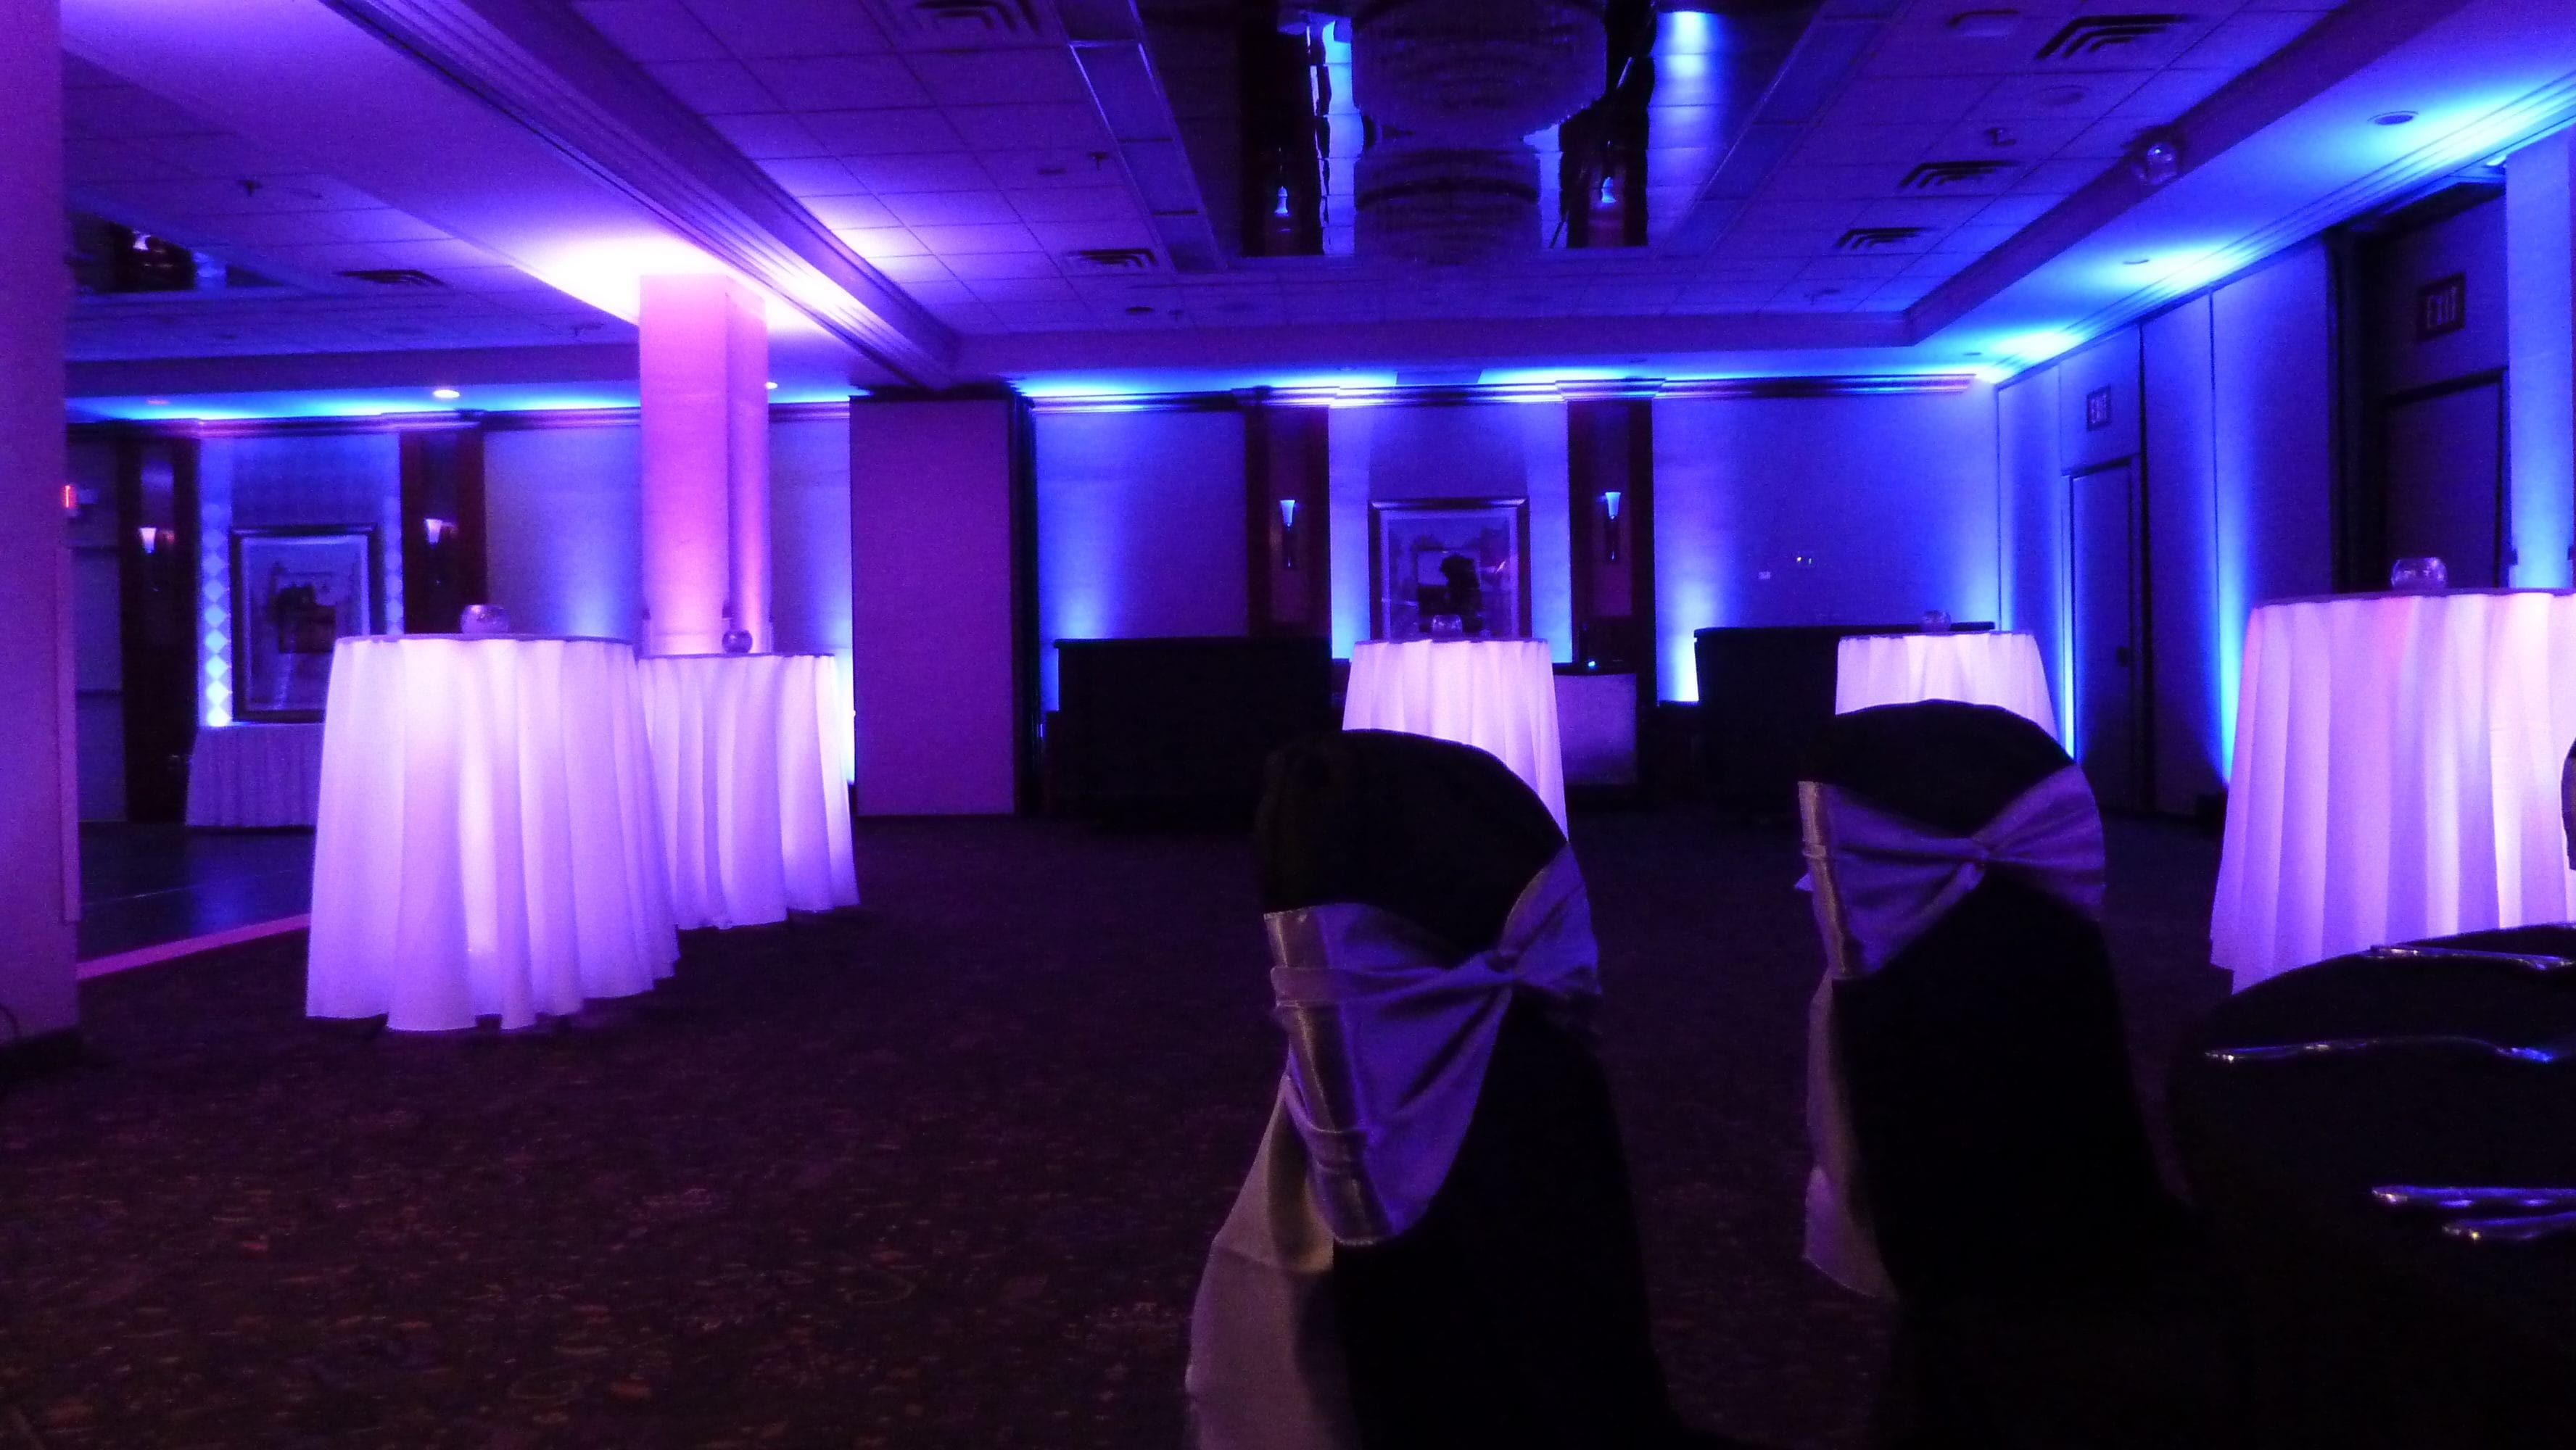 Holiday Inn, Duluth
Great Lakes Ballroom with purple and magenta pink wedding lighting.